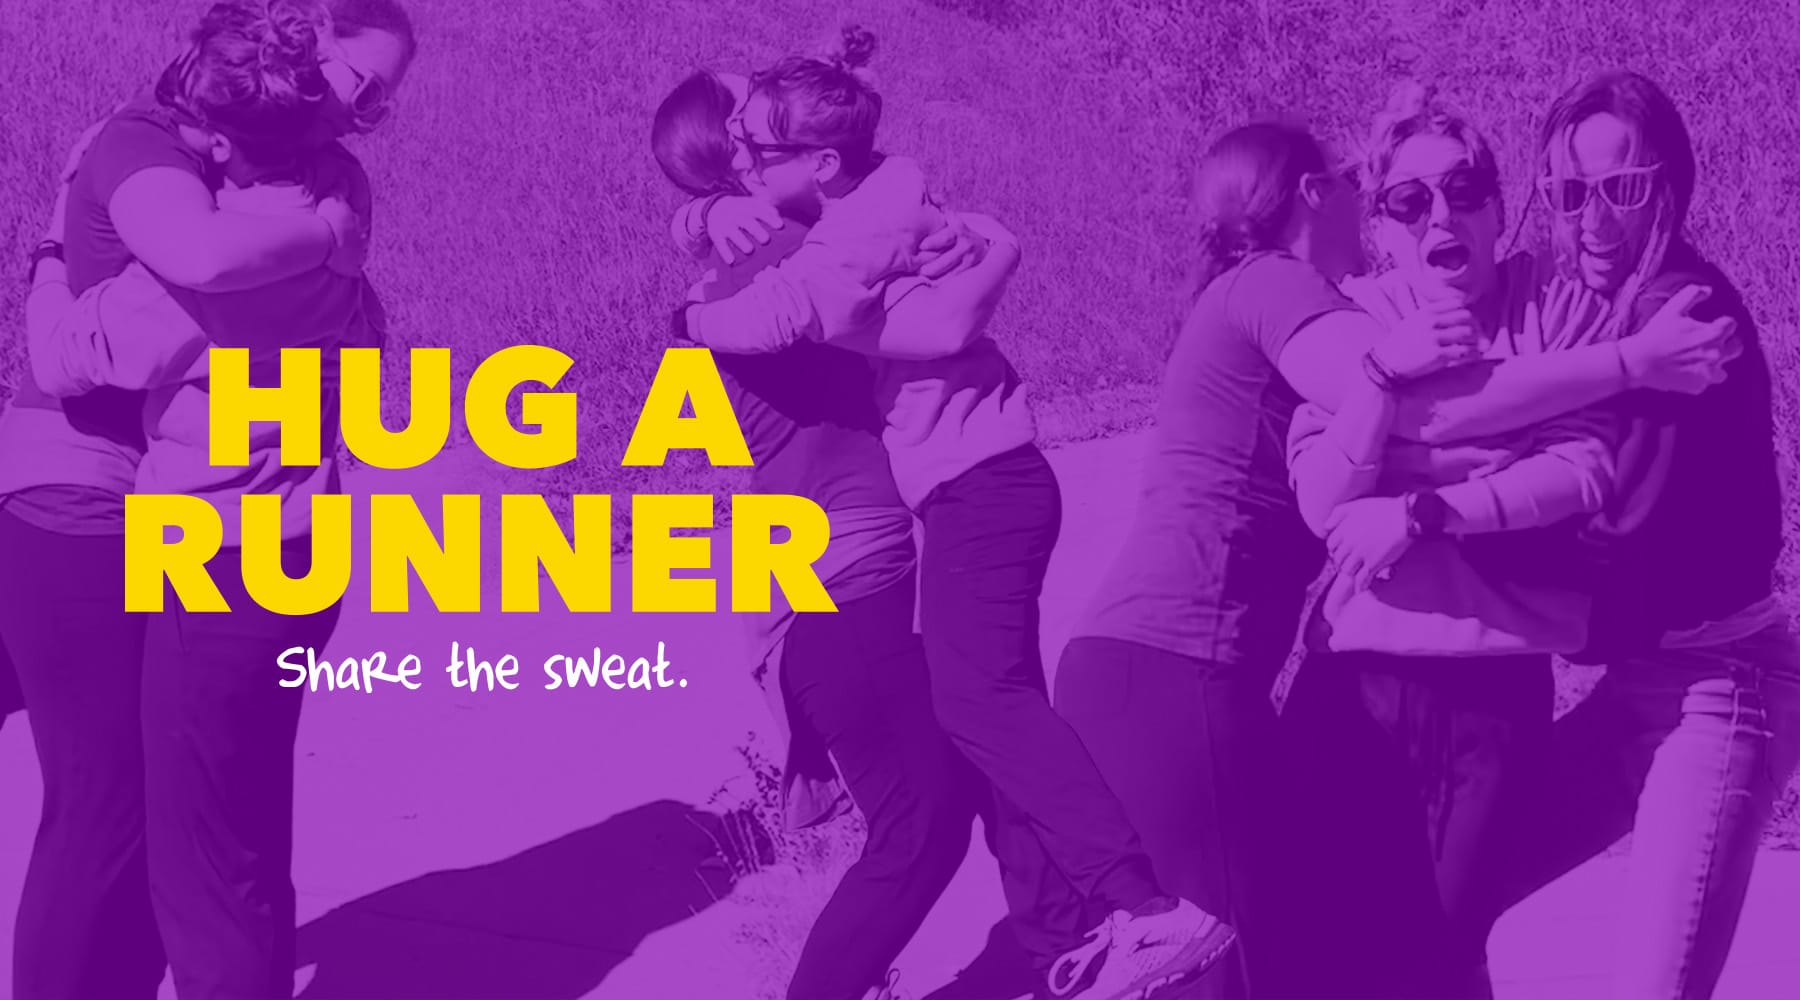 4 Ways to Participate in Globally Organized Hug A Runner Day